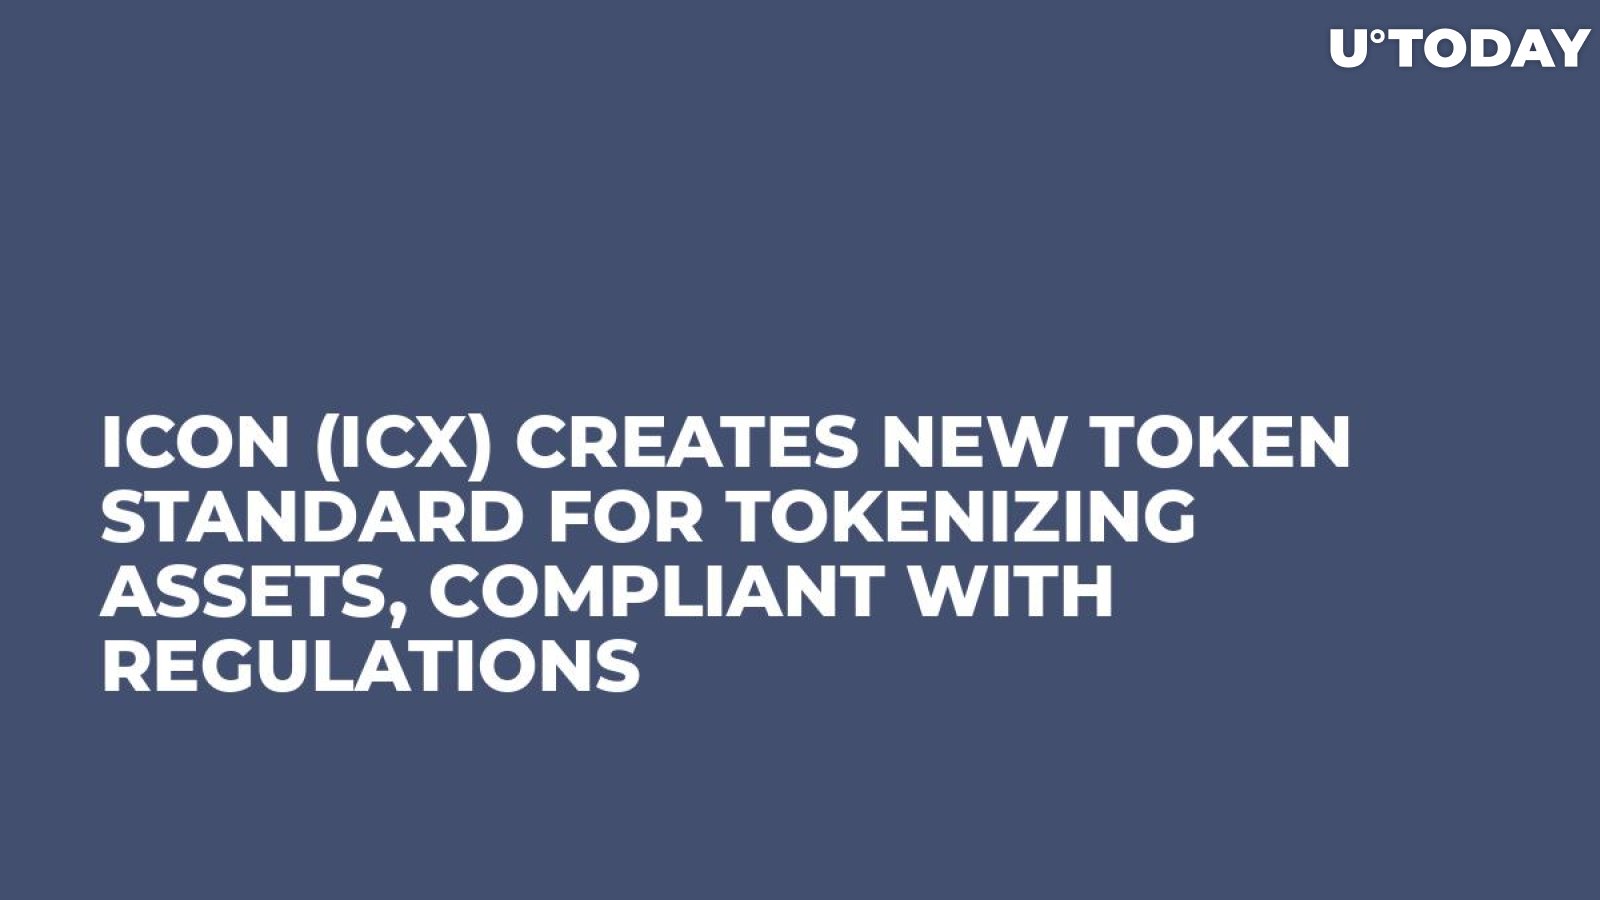 ICON (ICX) Creates New Token Standard for Tokenizing Assets, Compliant with Regulations